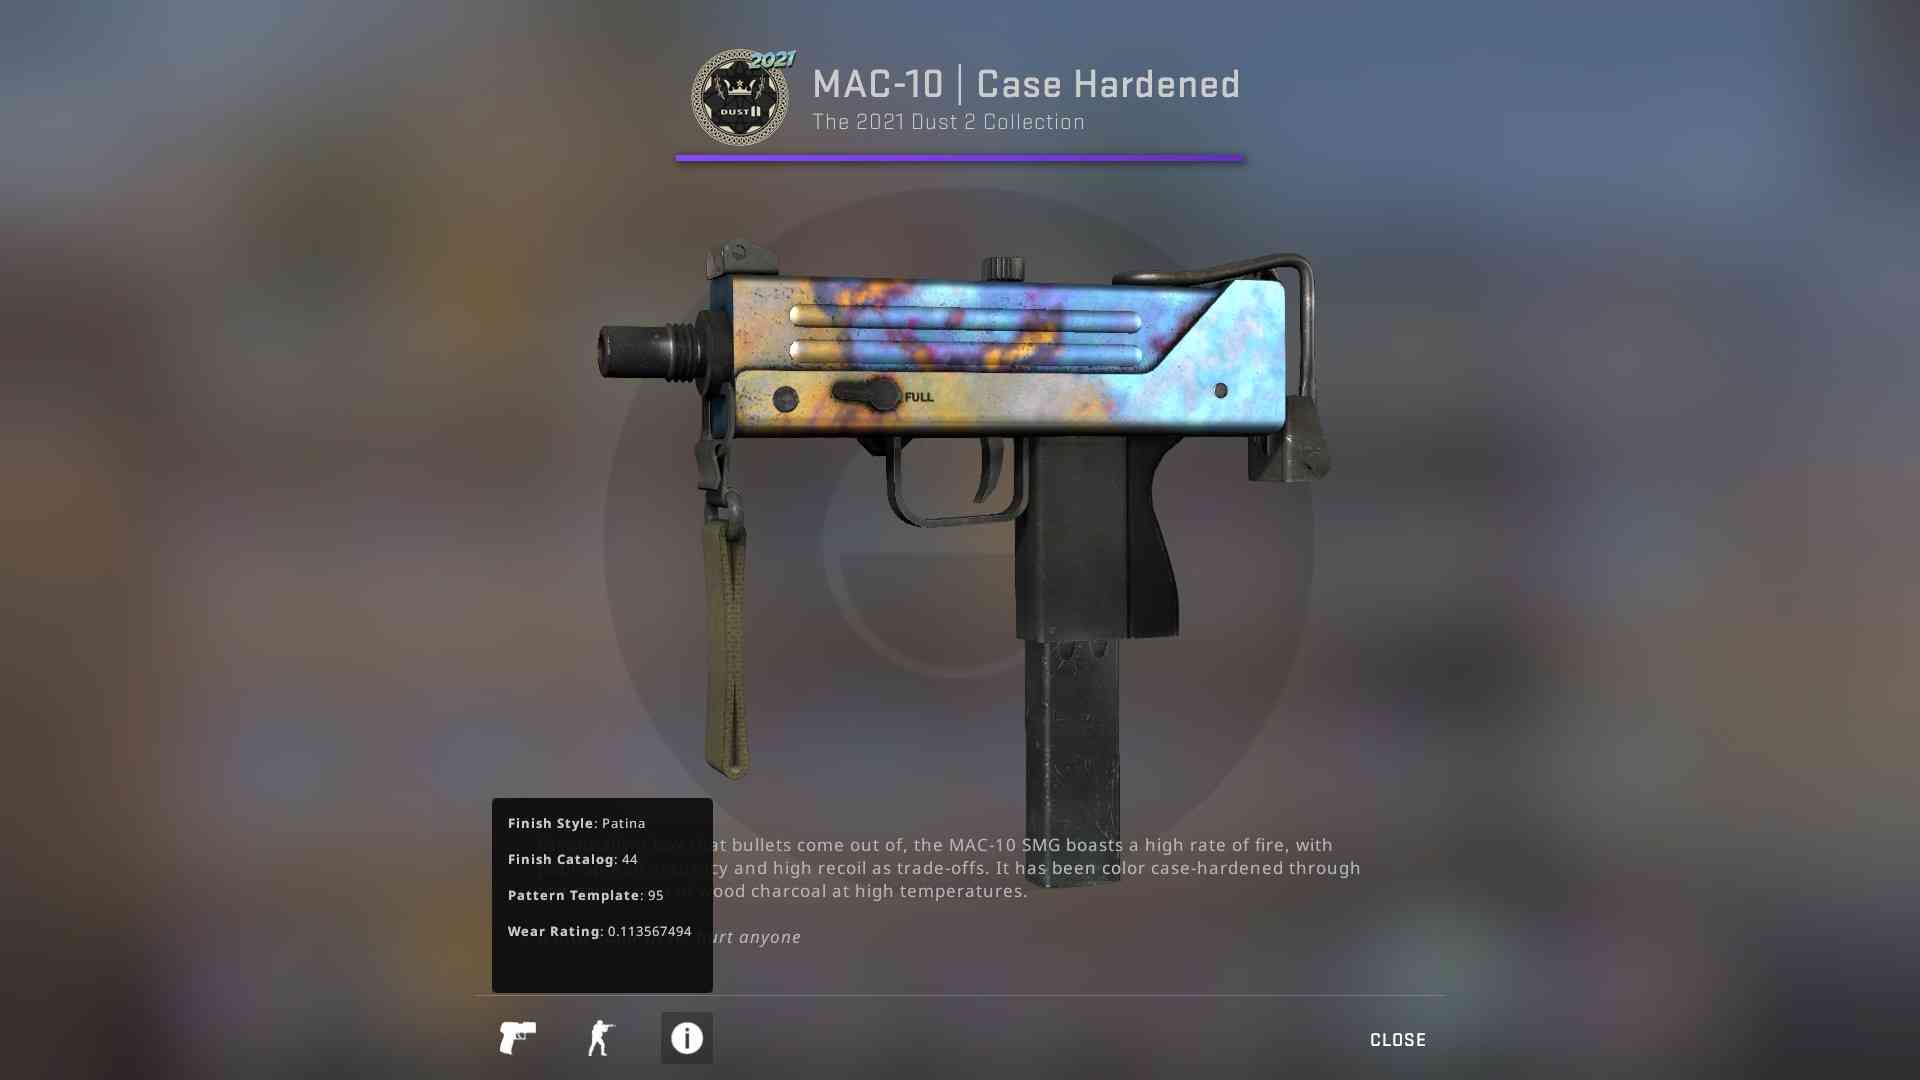 The best blue jem pattern for the MAC-10